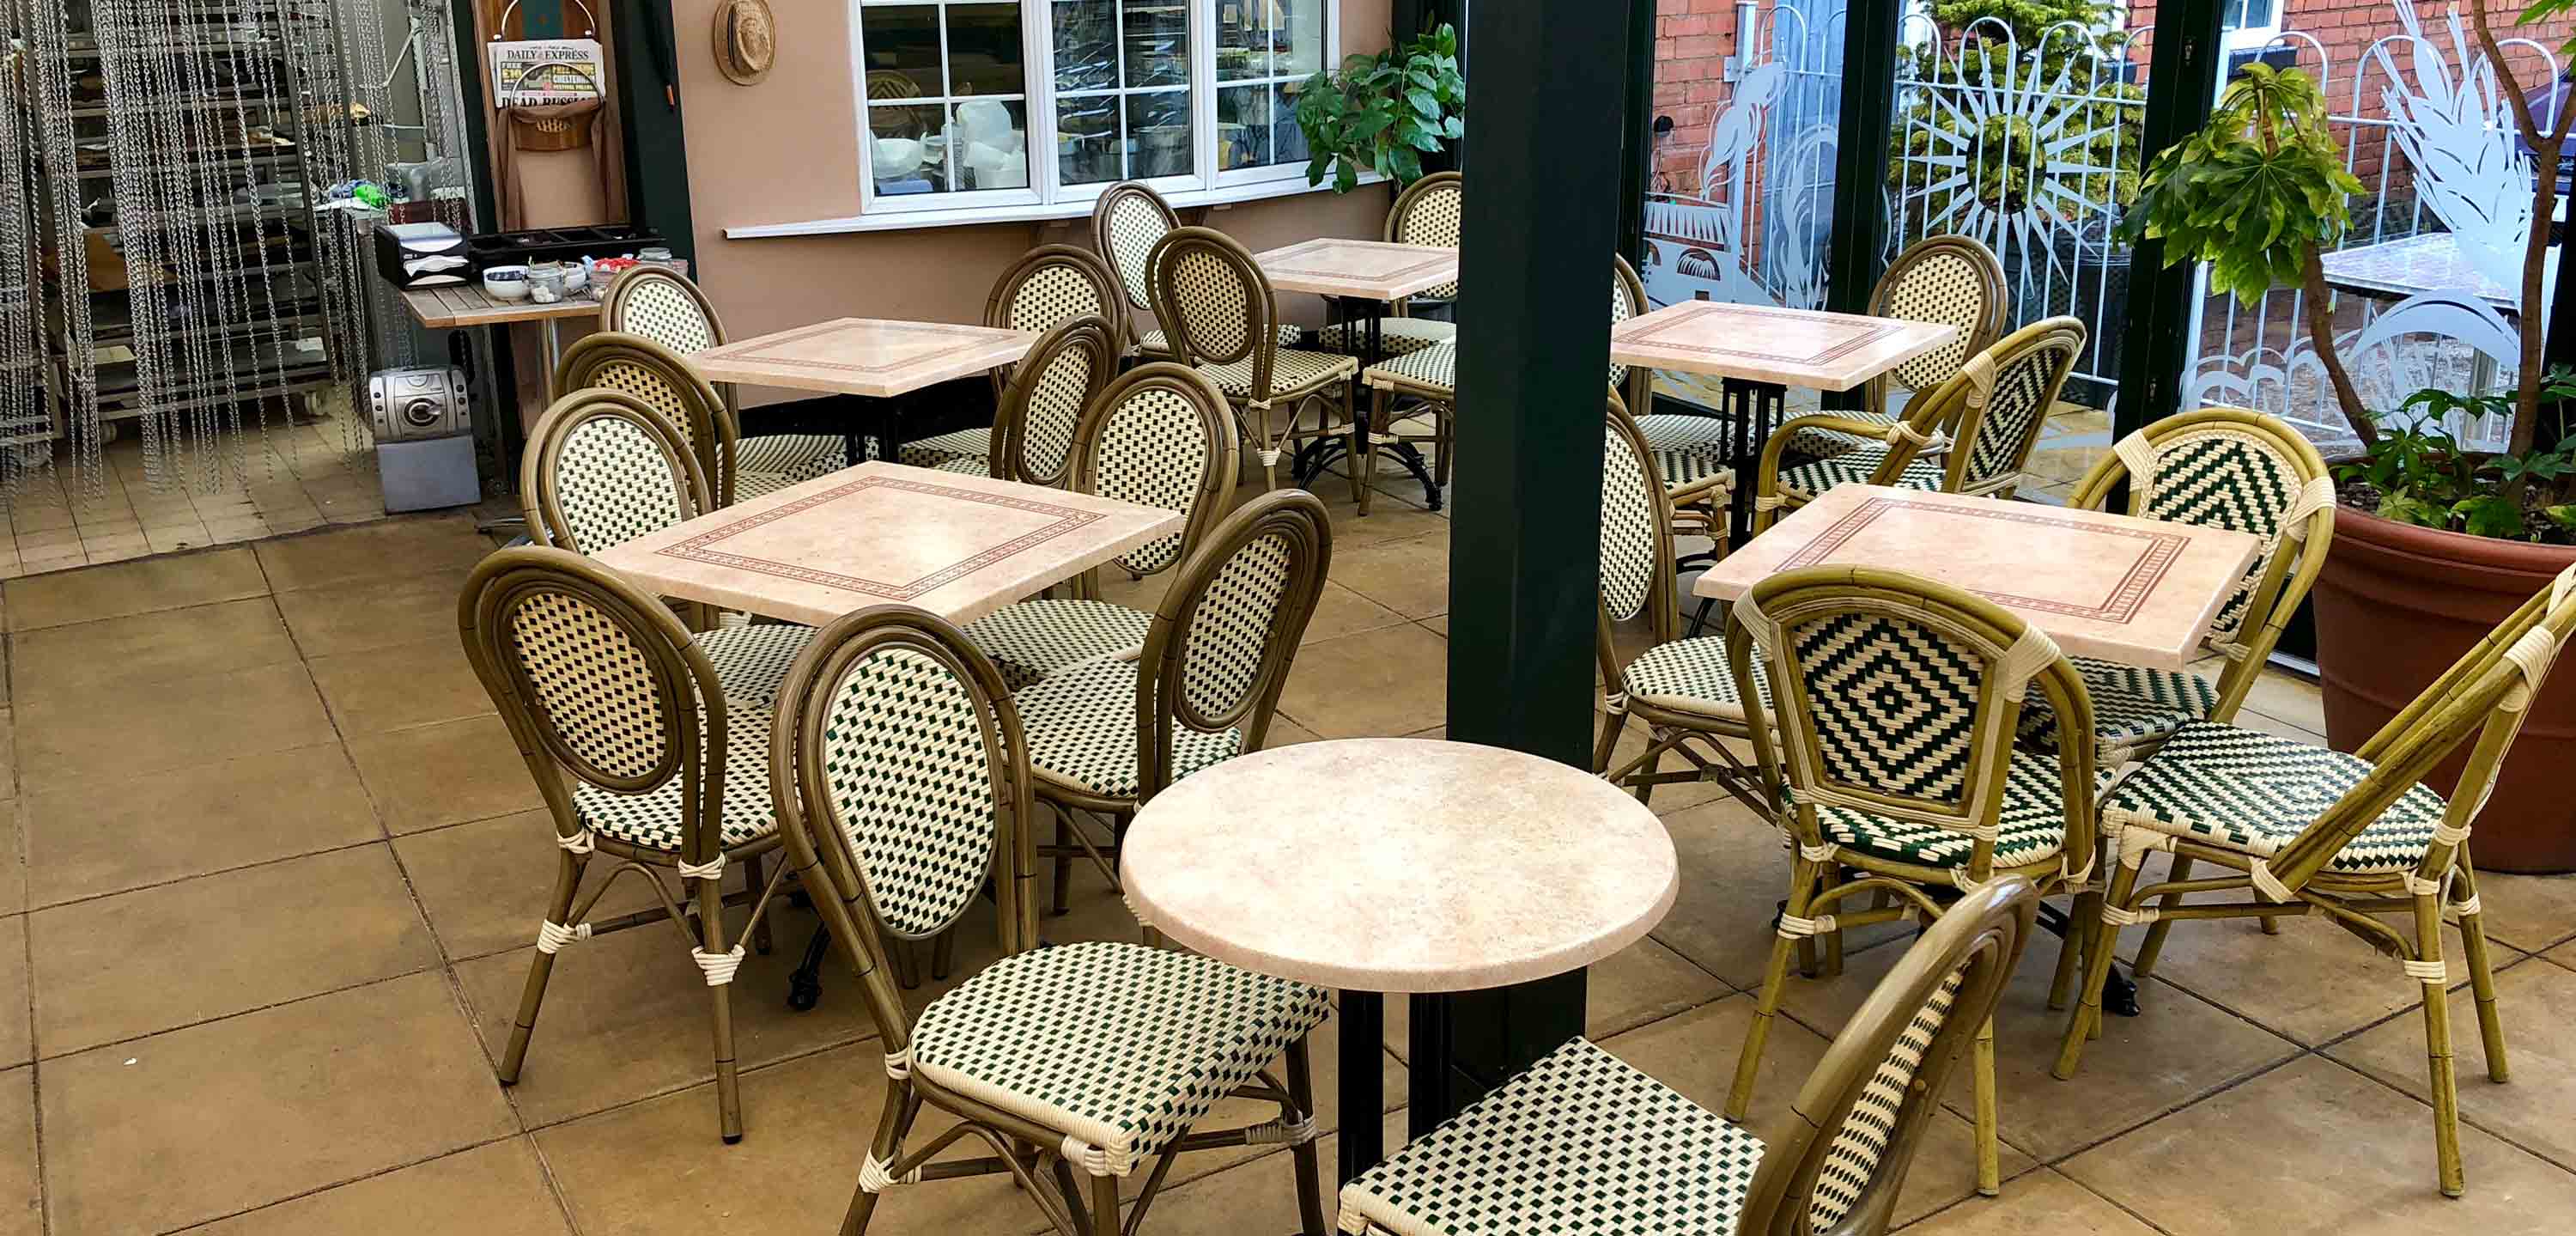 Seating at Wedges Bakery in Hockley Heath